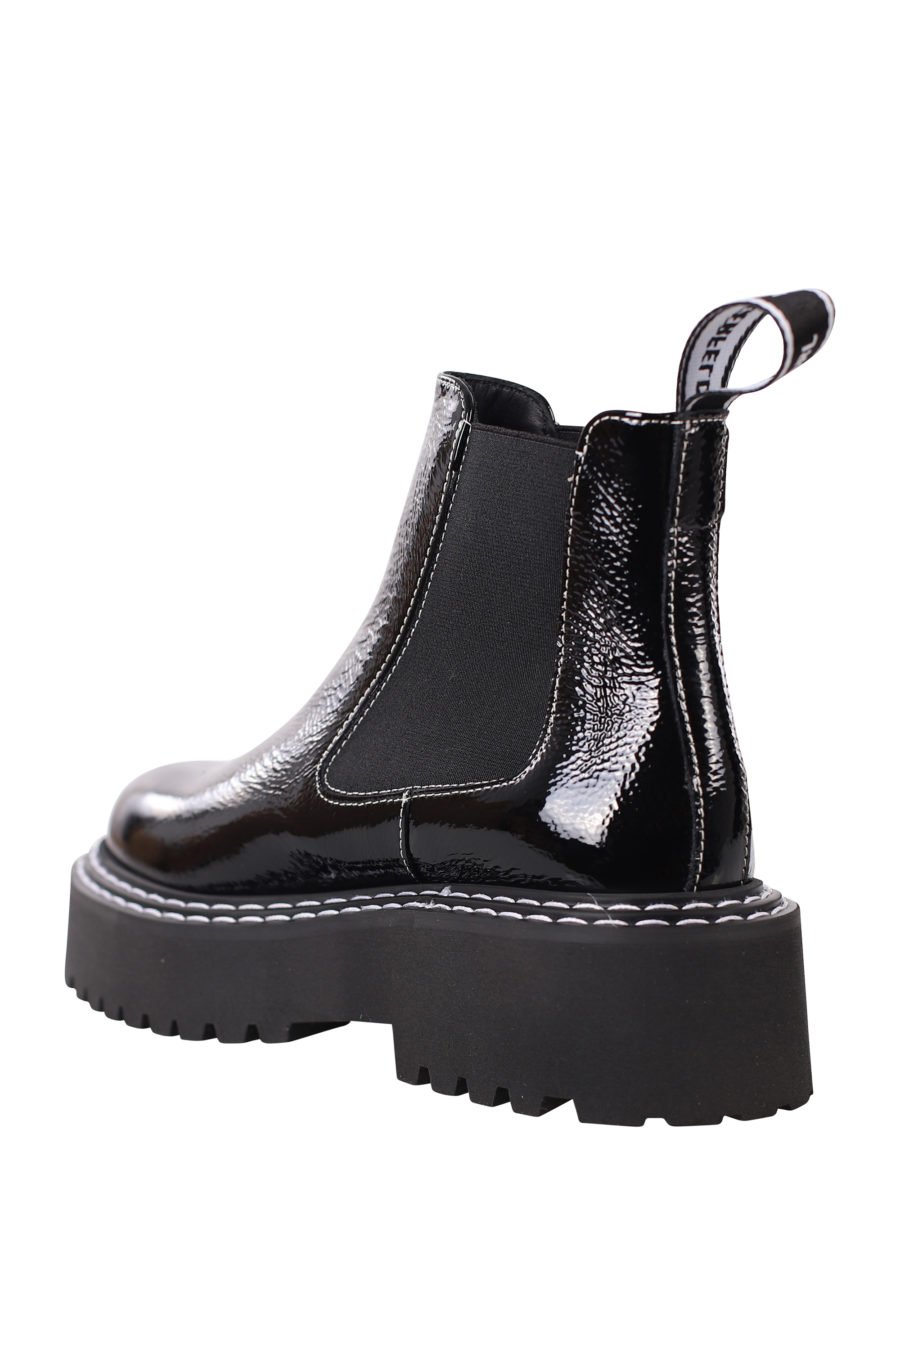 Black ankle boots with platform and small logo - IMG 0432